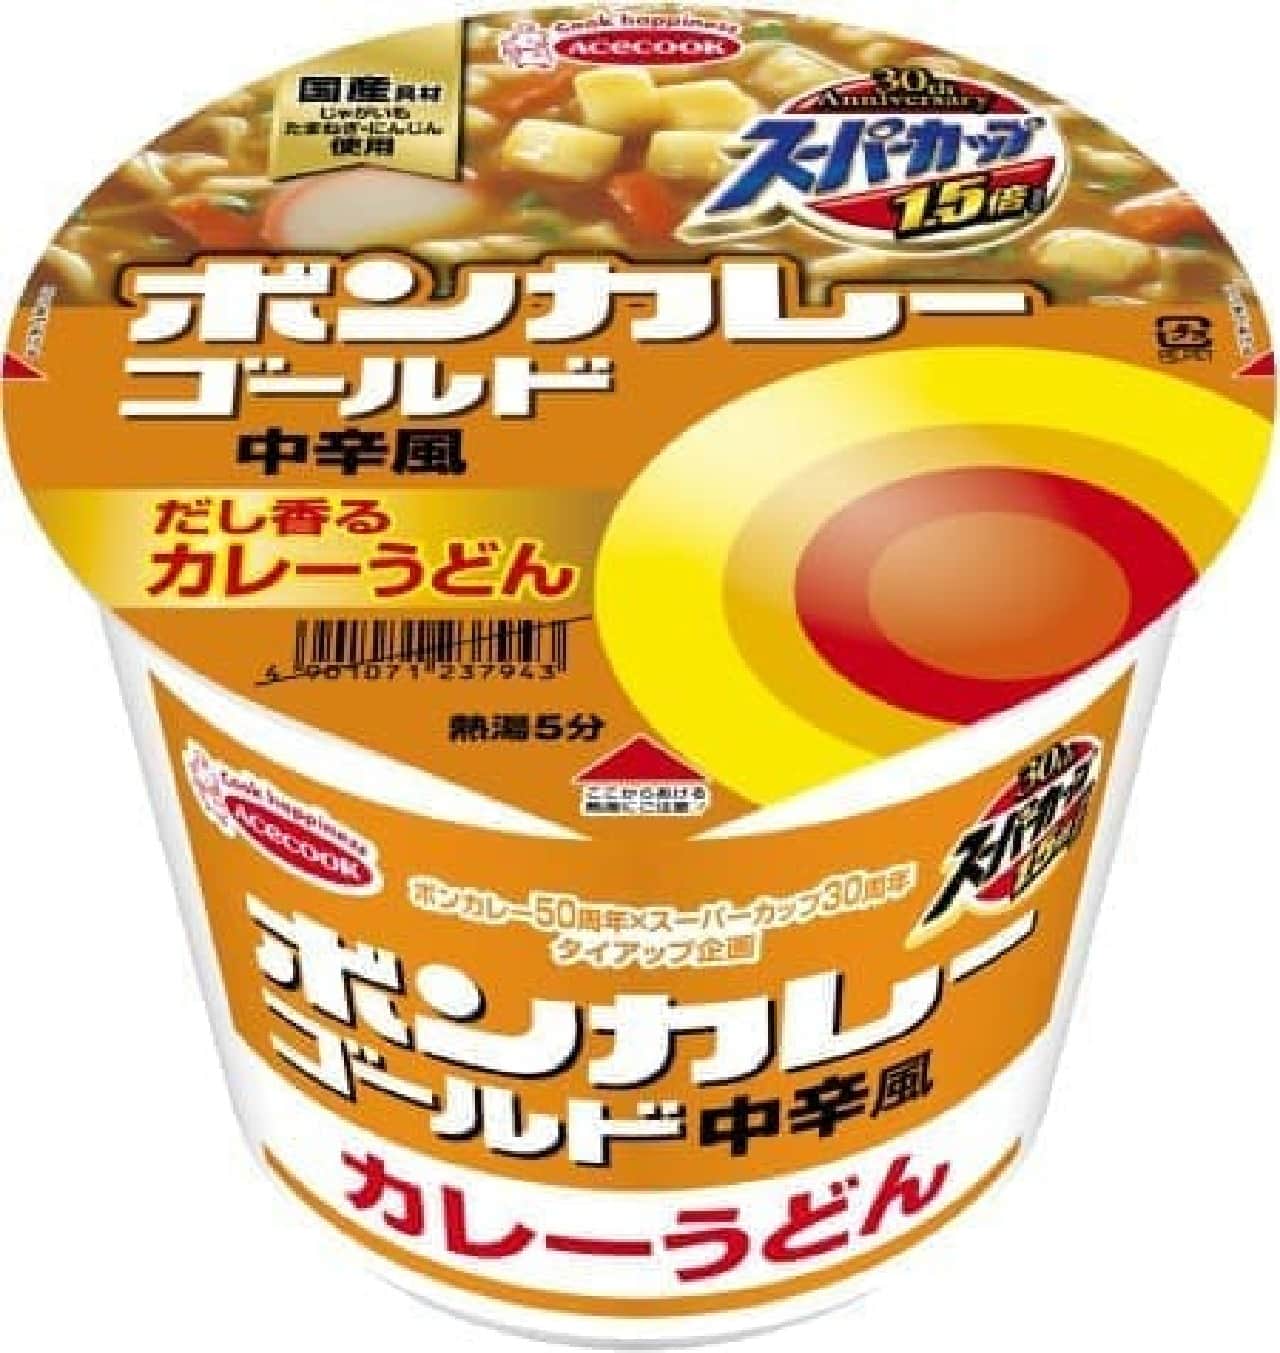 Super Cup 1.5x Bon Curry Gold Medium Spicy Curry Udon